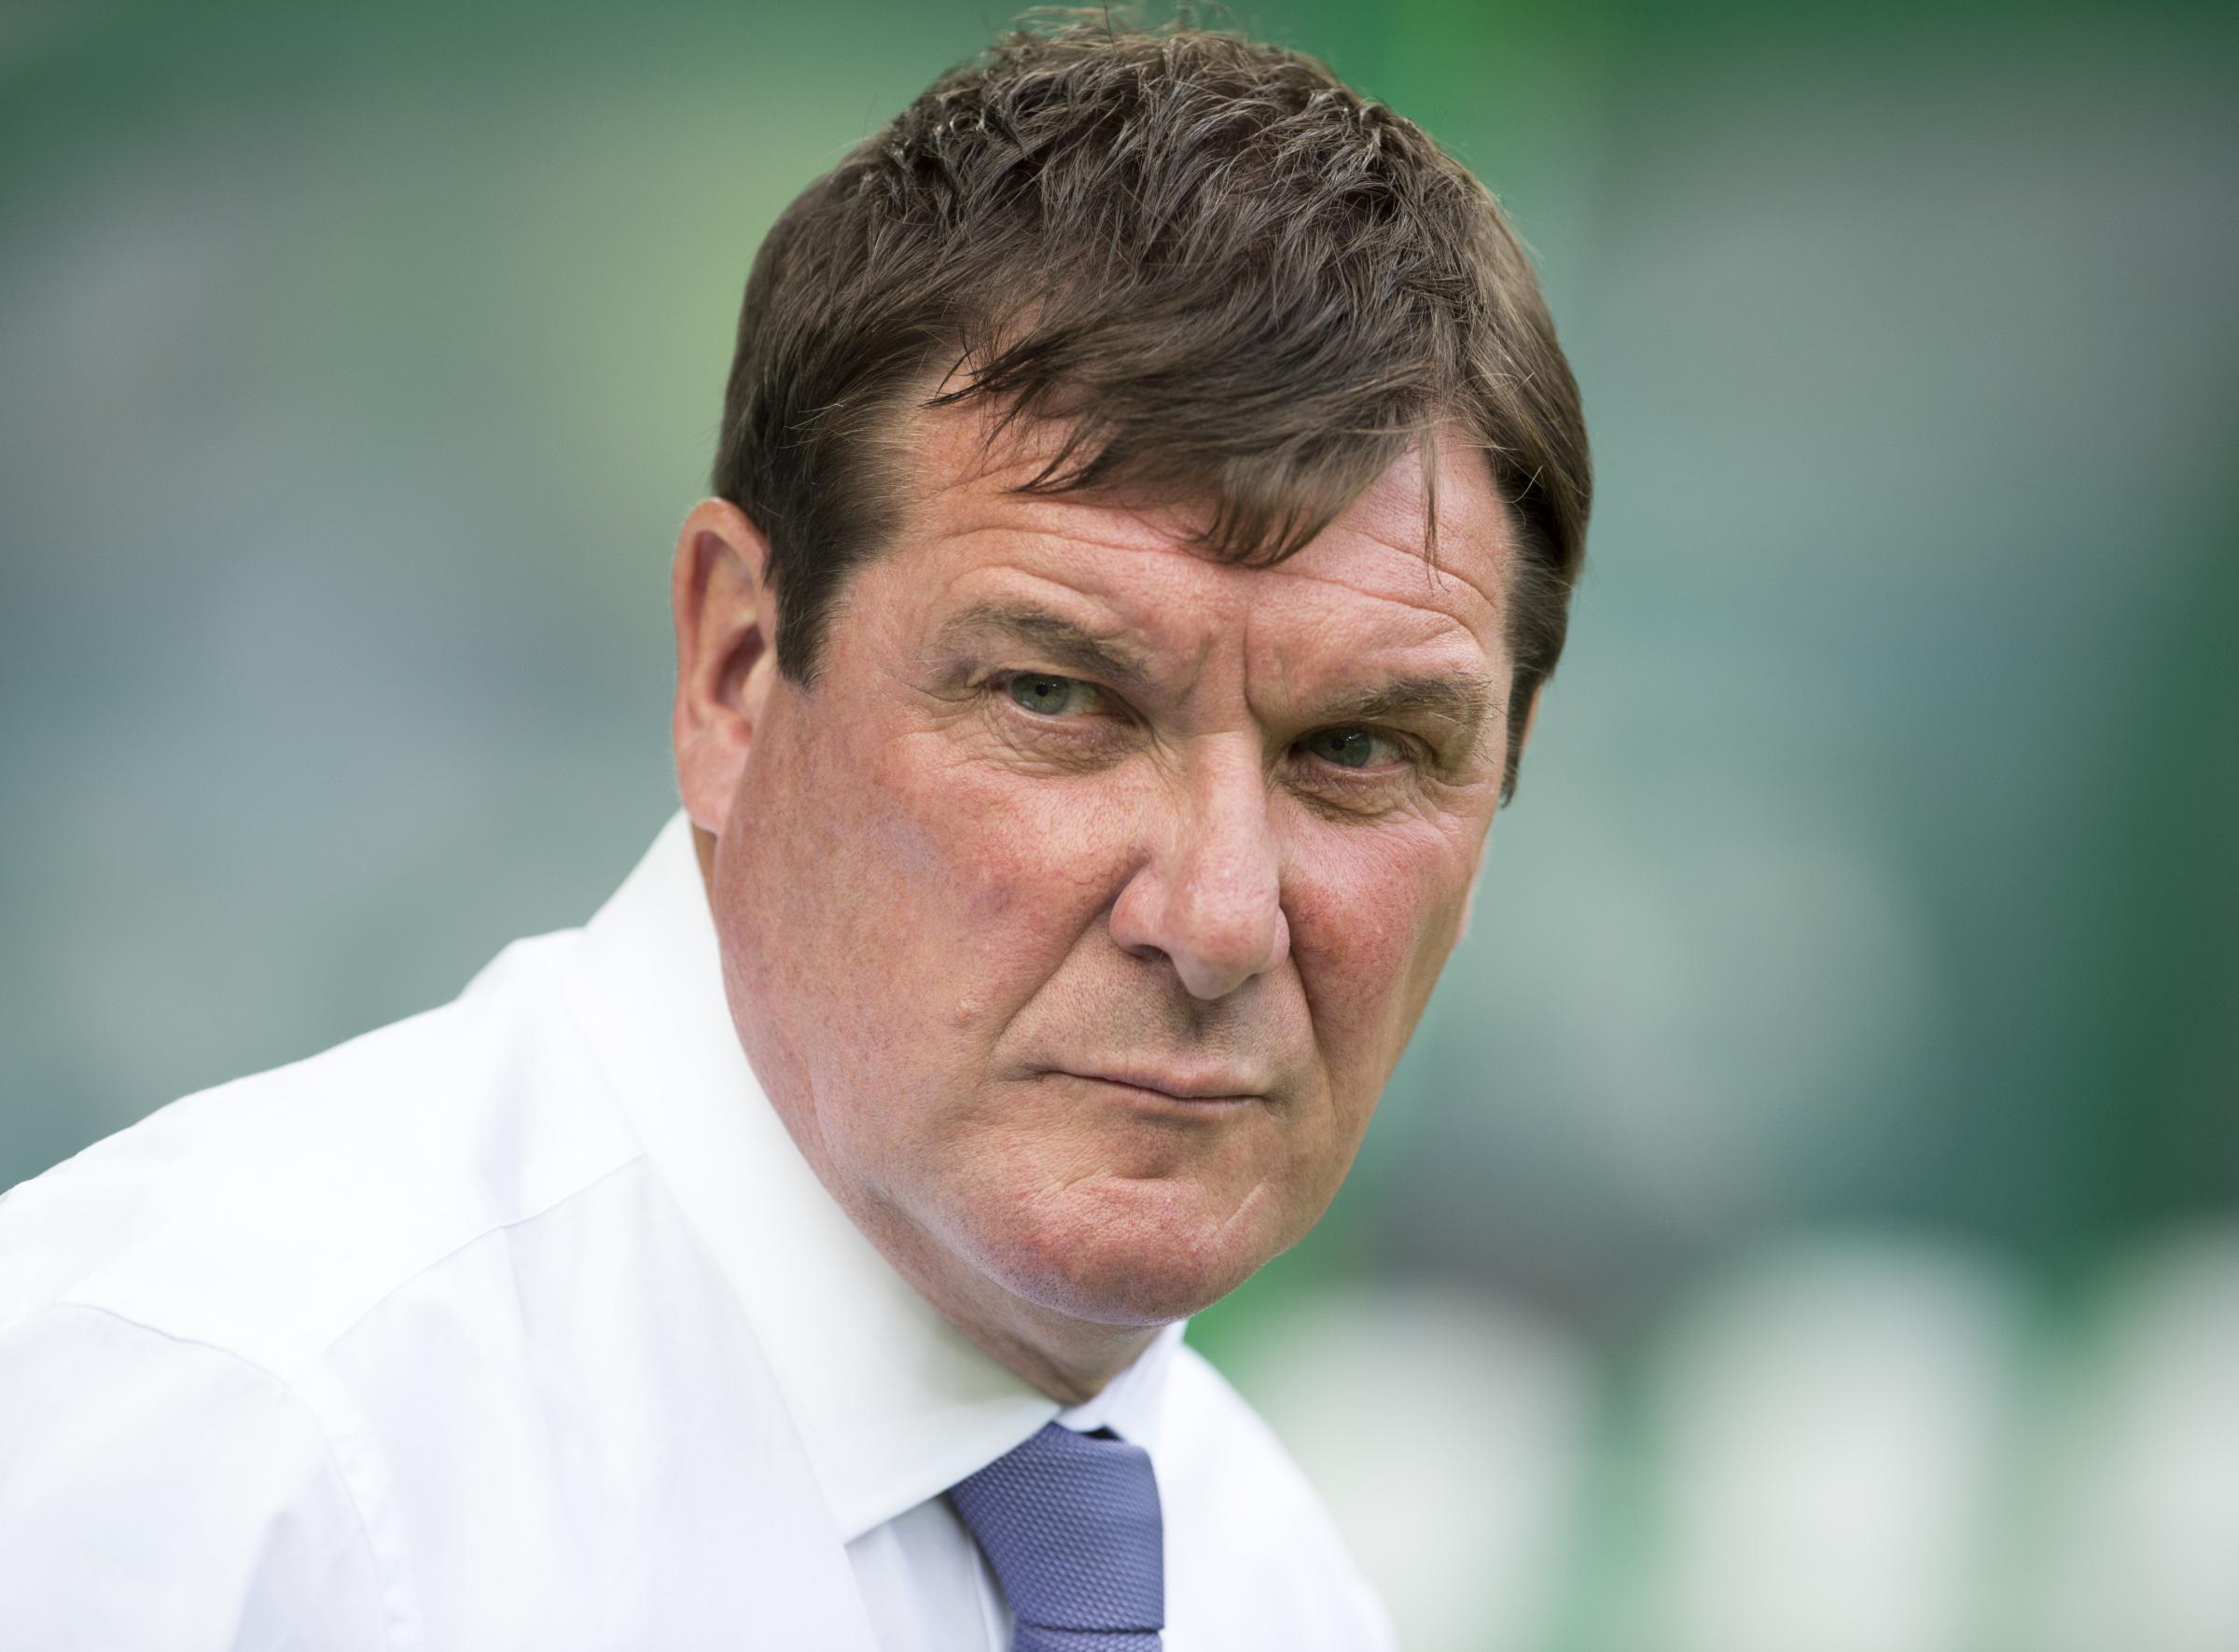 St Johnstone caretaker Alec Cleland admits he was 'shocked' when Tommy Wright announced he was leaving